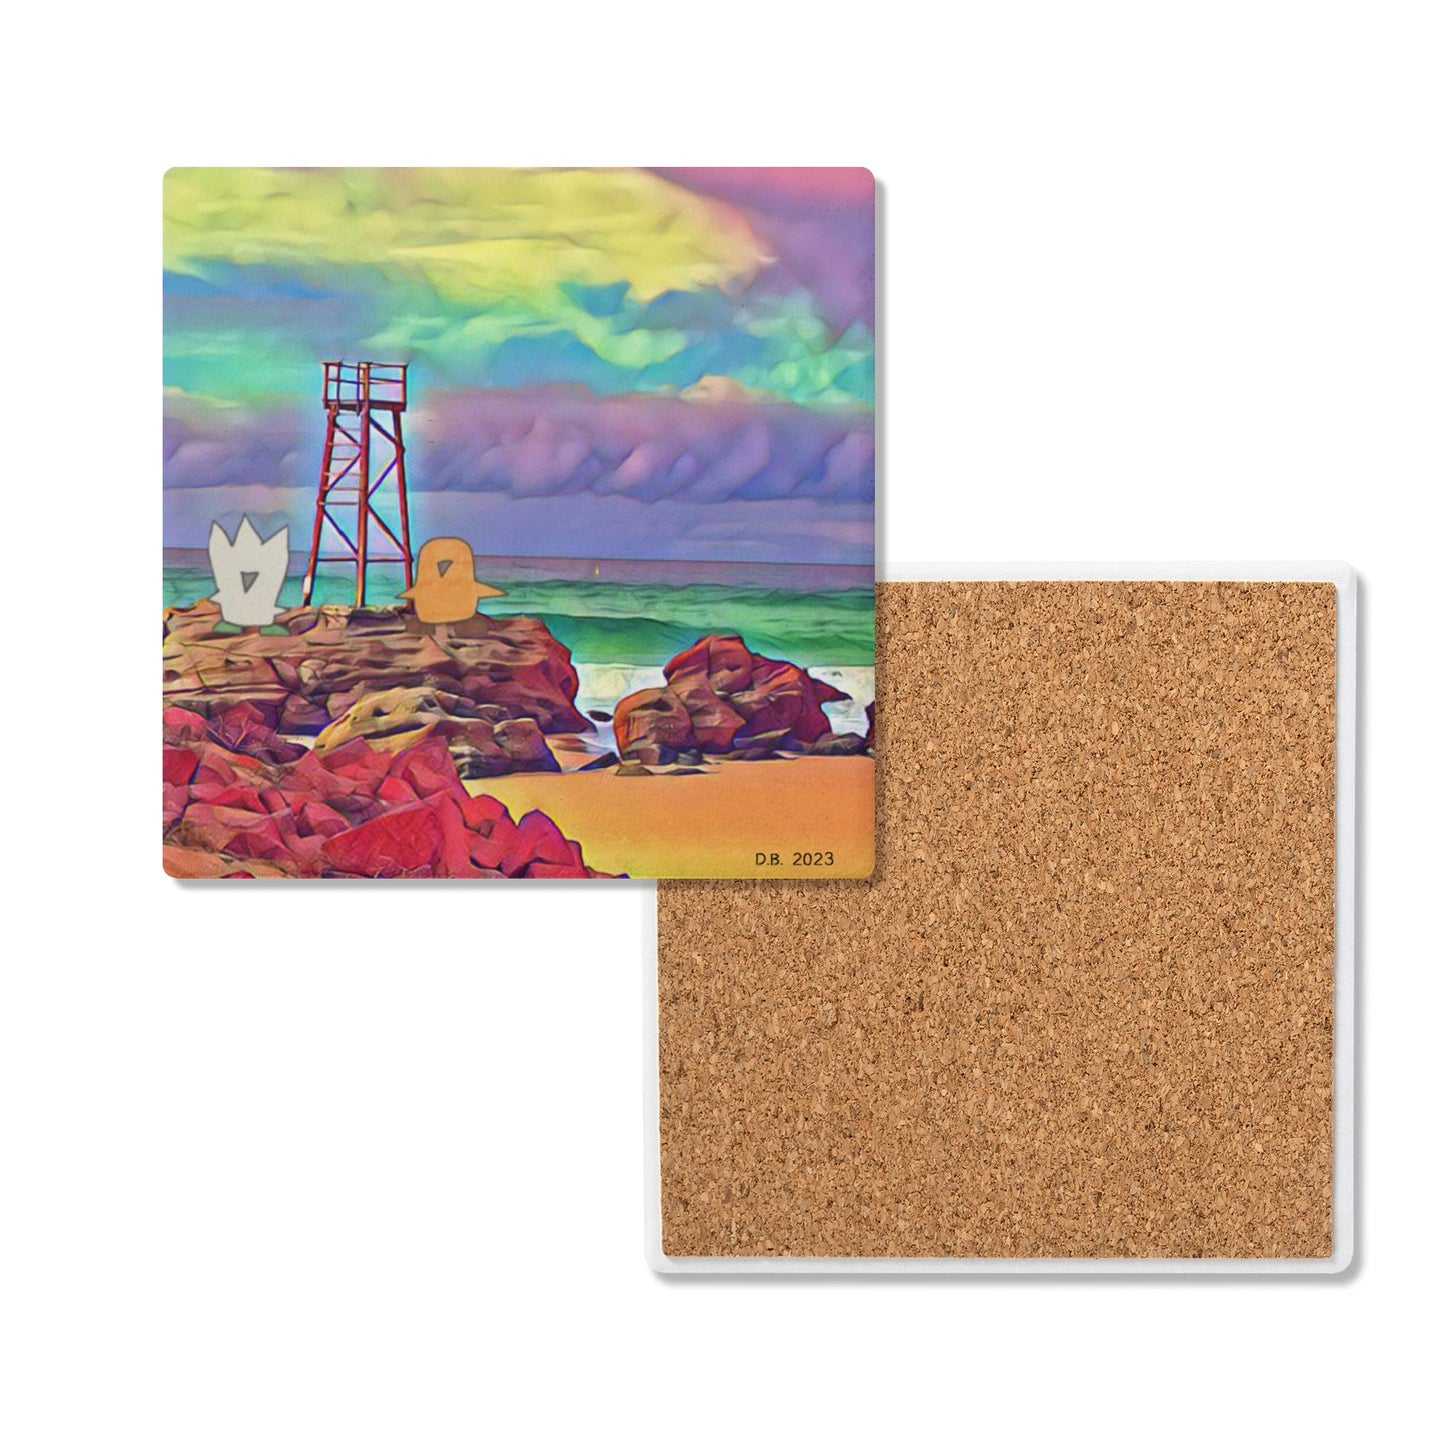 Fuzzy and Muffin Patrolling Redhead Beach by Artist D.B. Square Ceramic Coasters